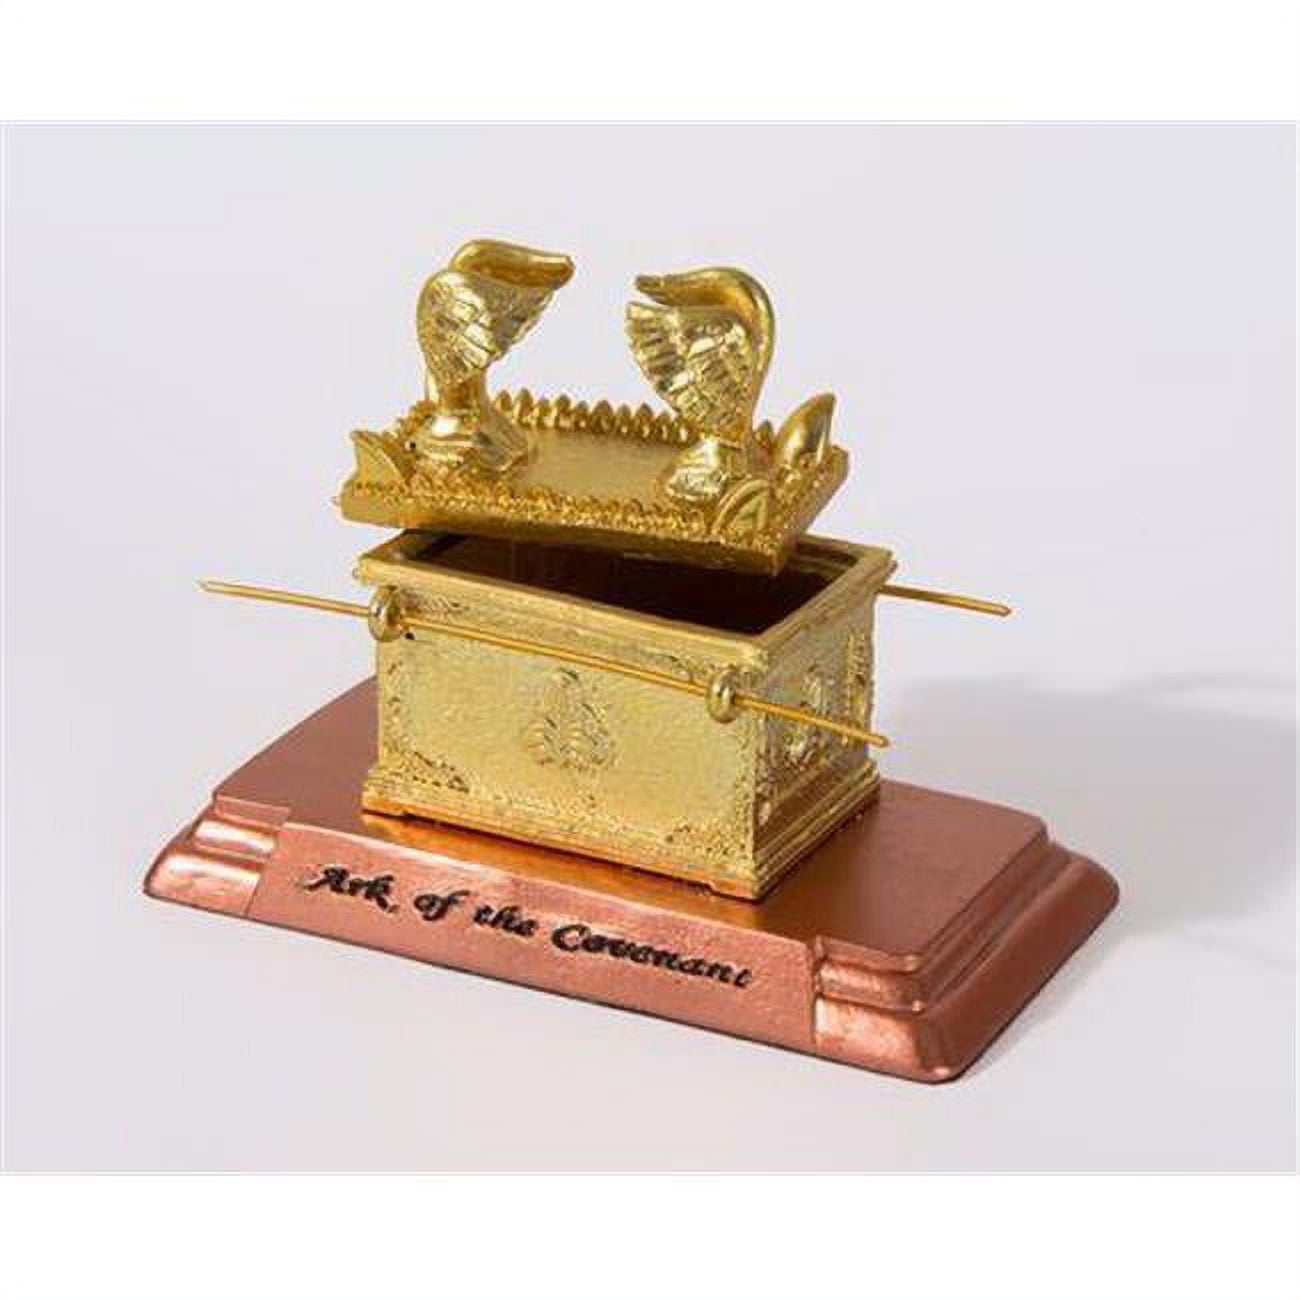 154031 No. 7523 Ark Of The Covenant With Sacred Elements Desktop Set - Small